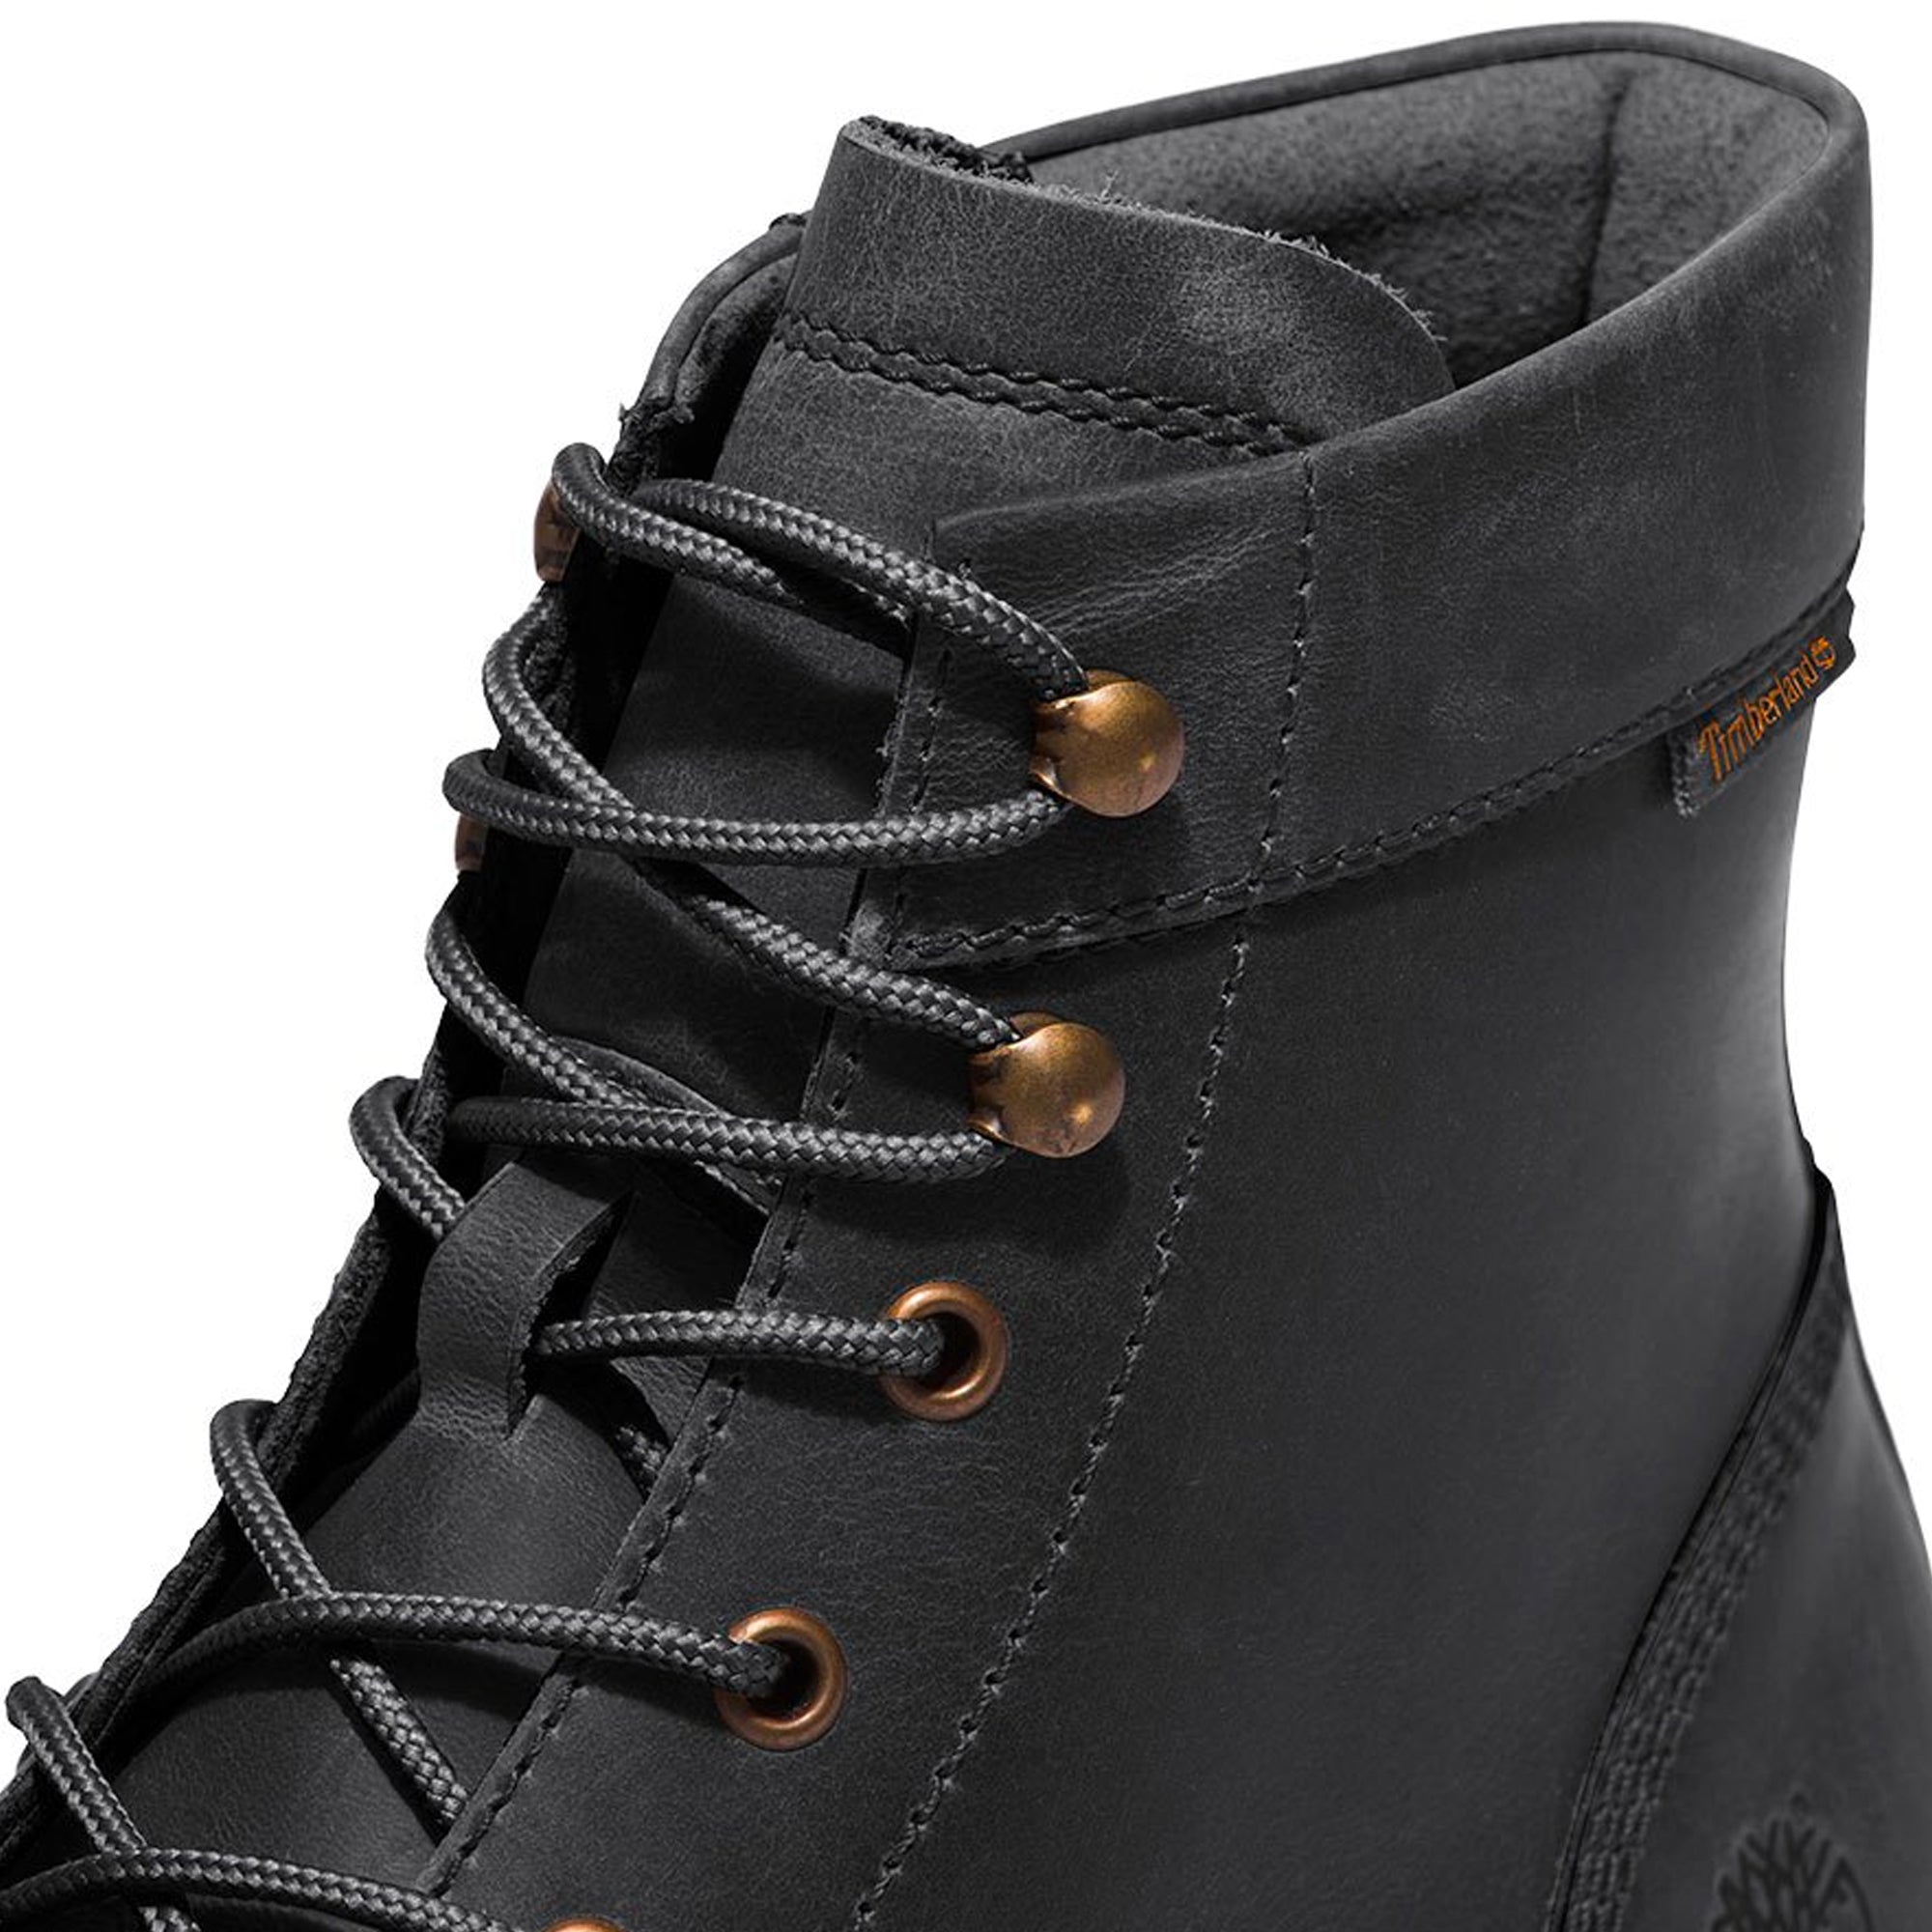 Timberland Newmarket 2 Rugged Boot - Black Full Grain Leather